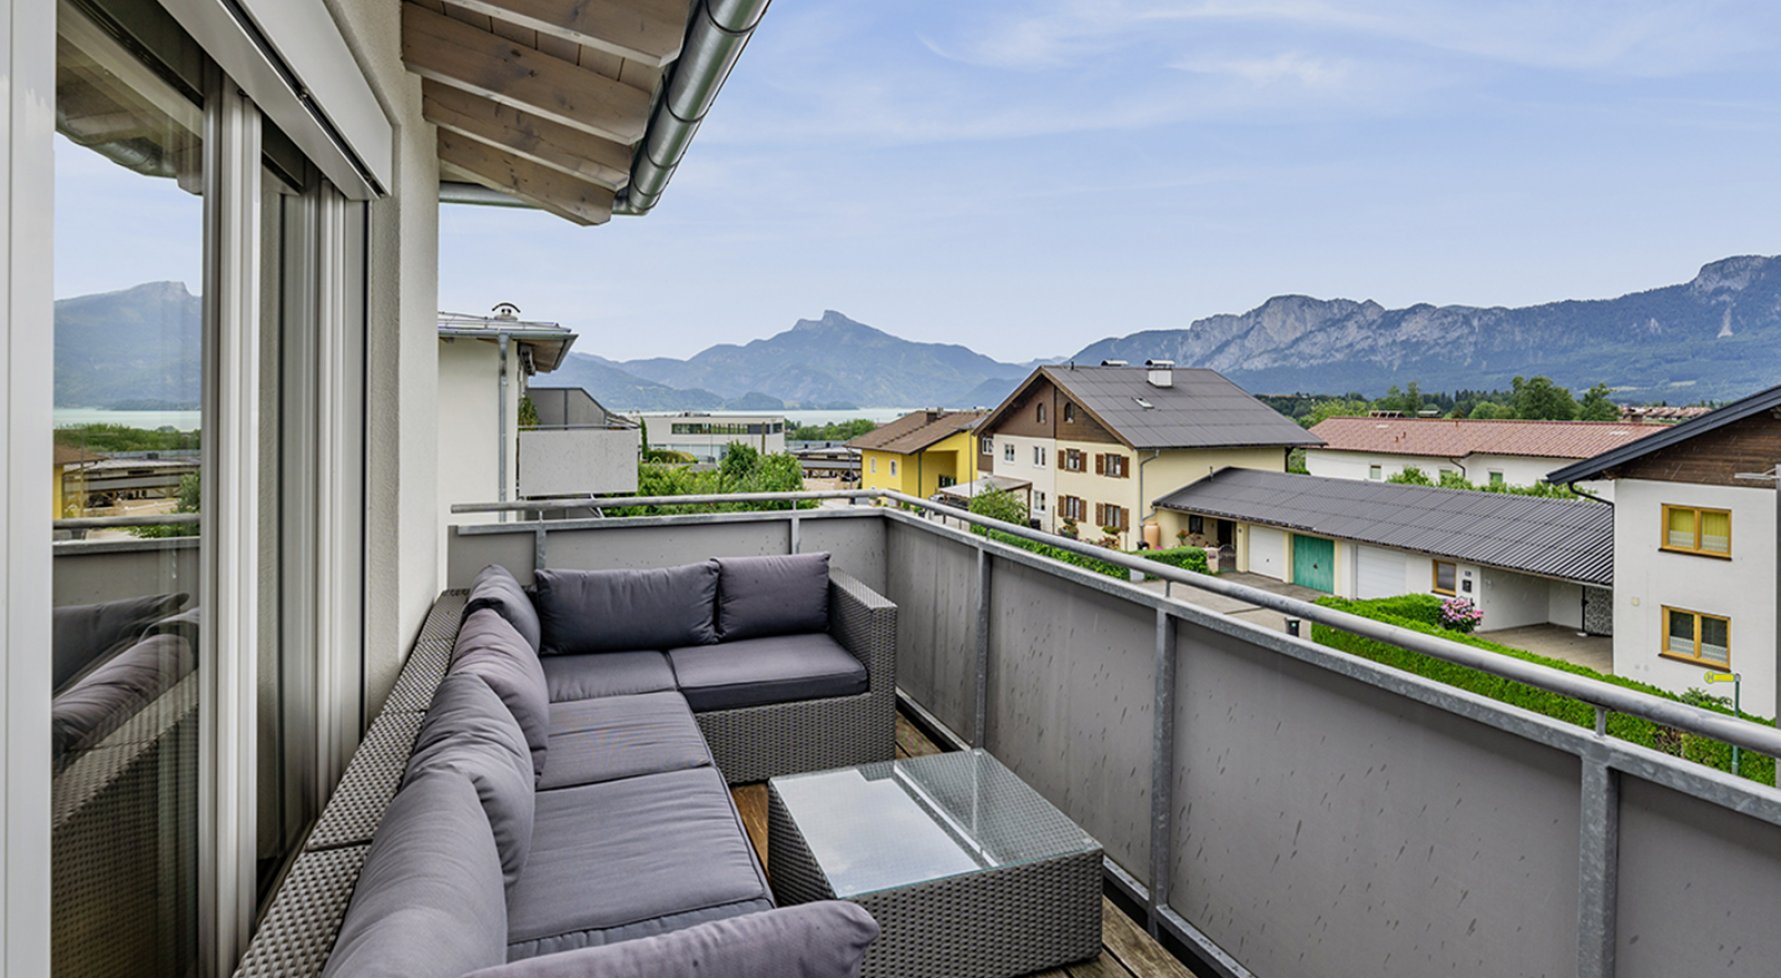 Property in 5310 Mondsee - Schlössl: Here, the view takes center stage - Living with a view of Mondsee! - picture 1